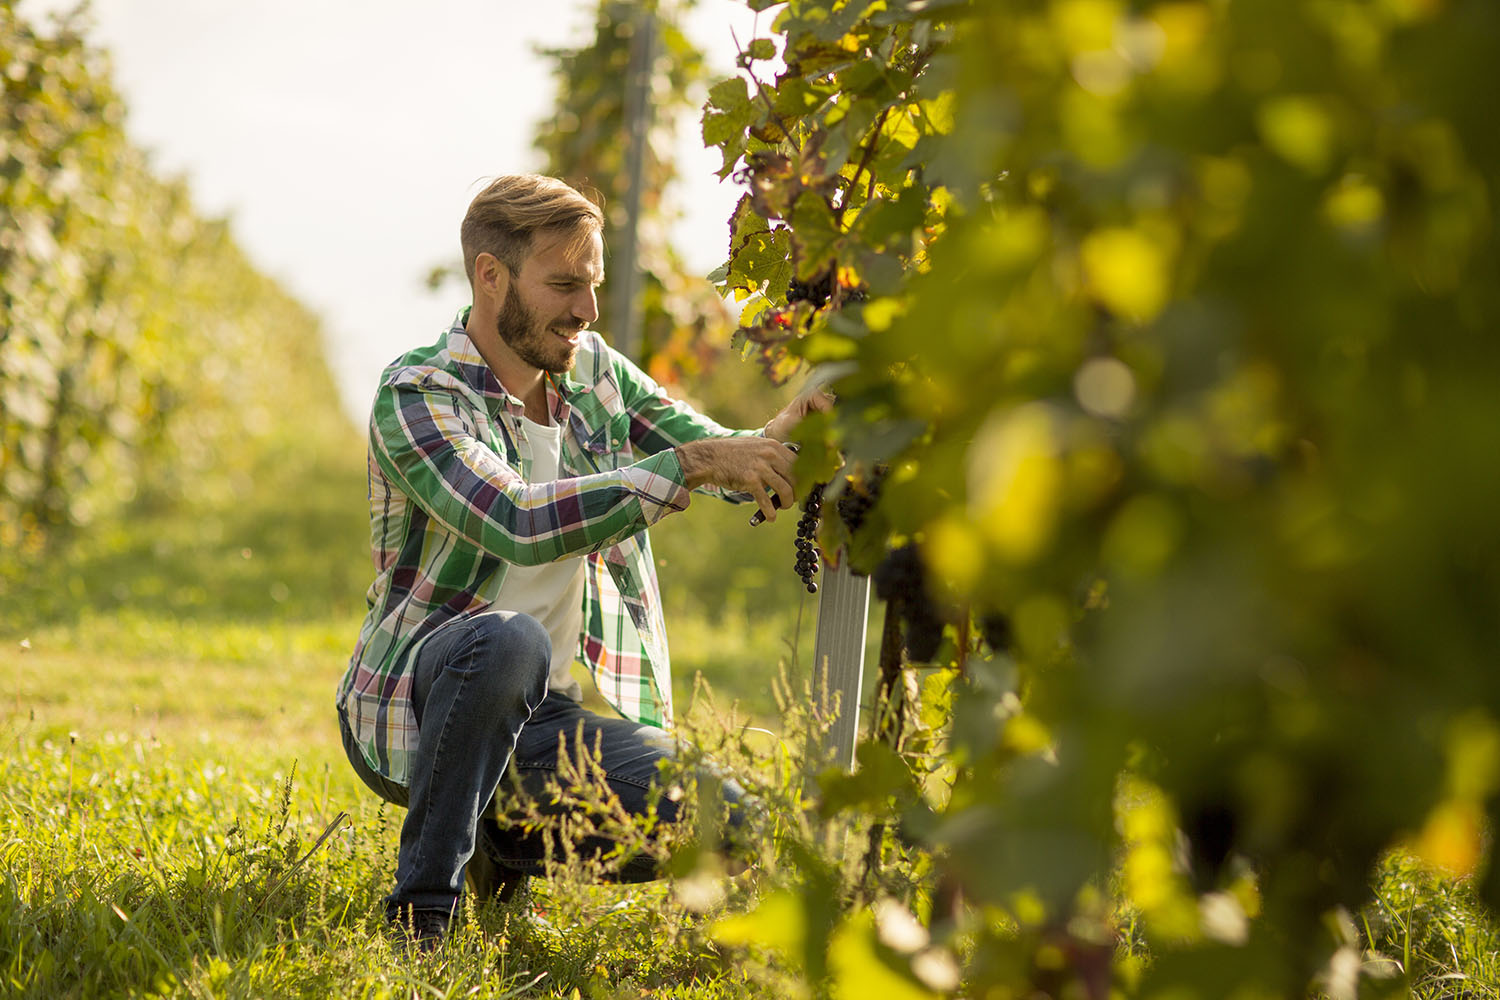 young blond man in a green checked shirt and jeans harvesting grapes in a vineyard